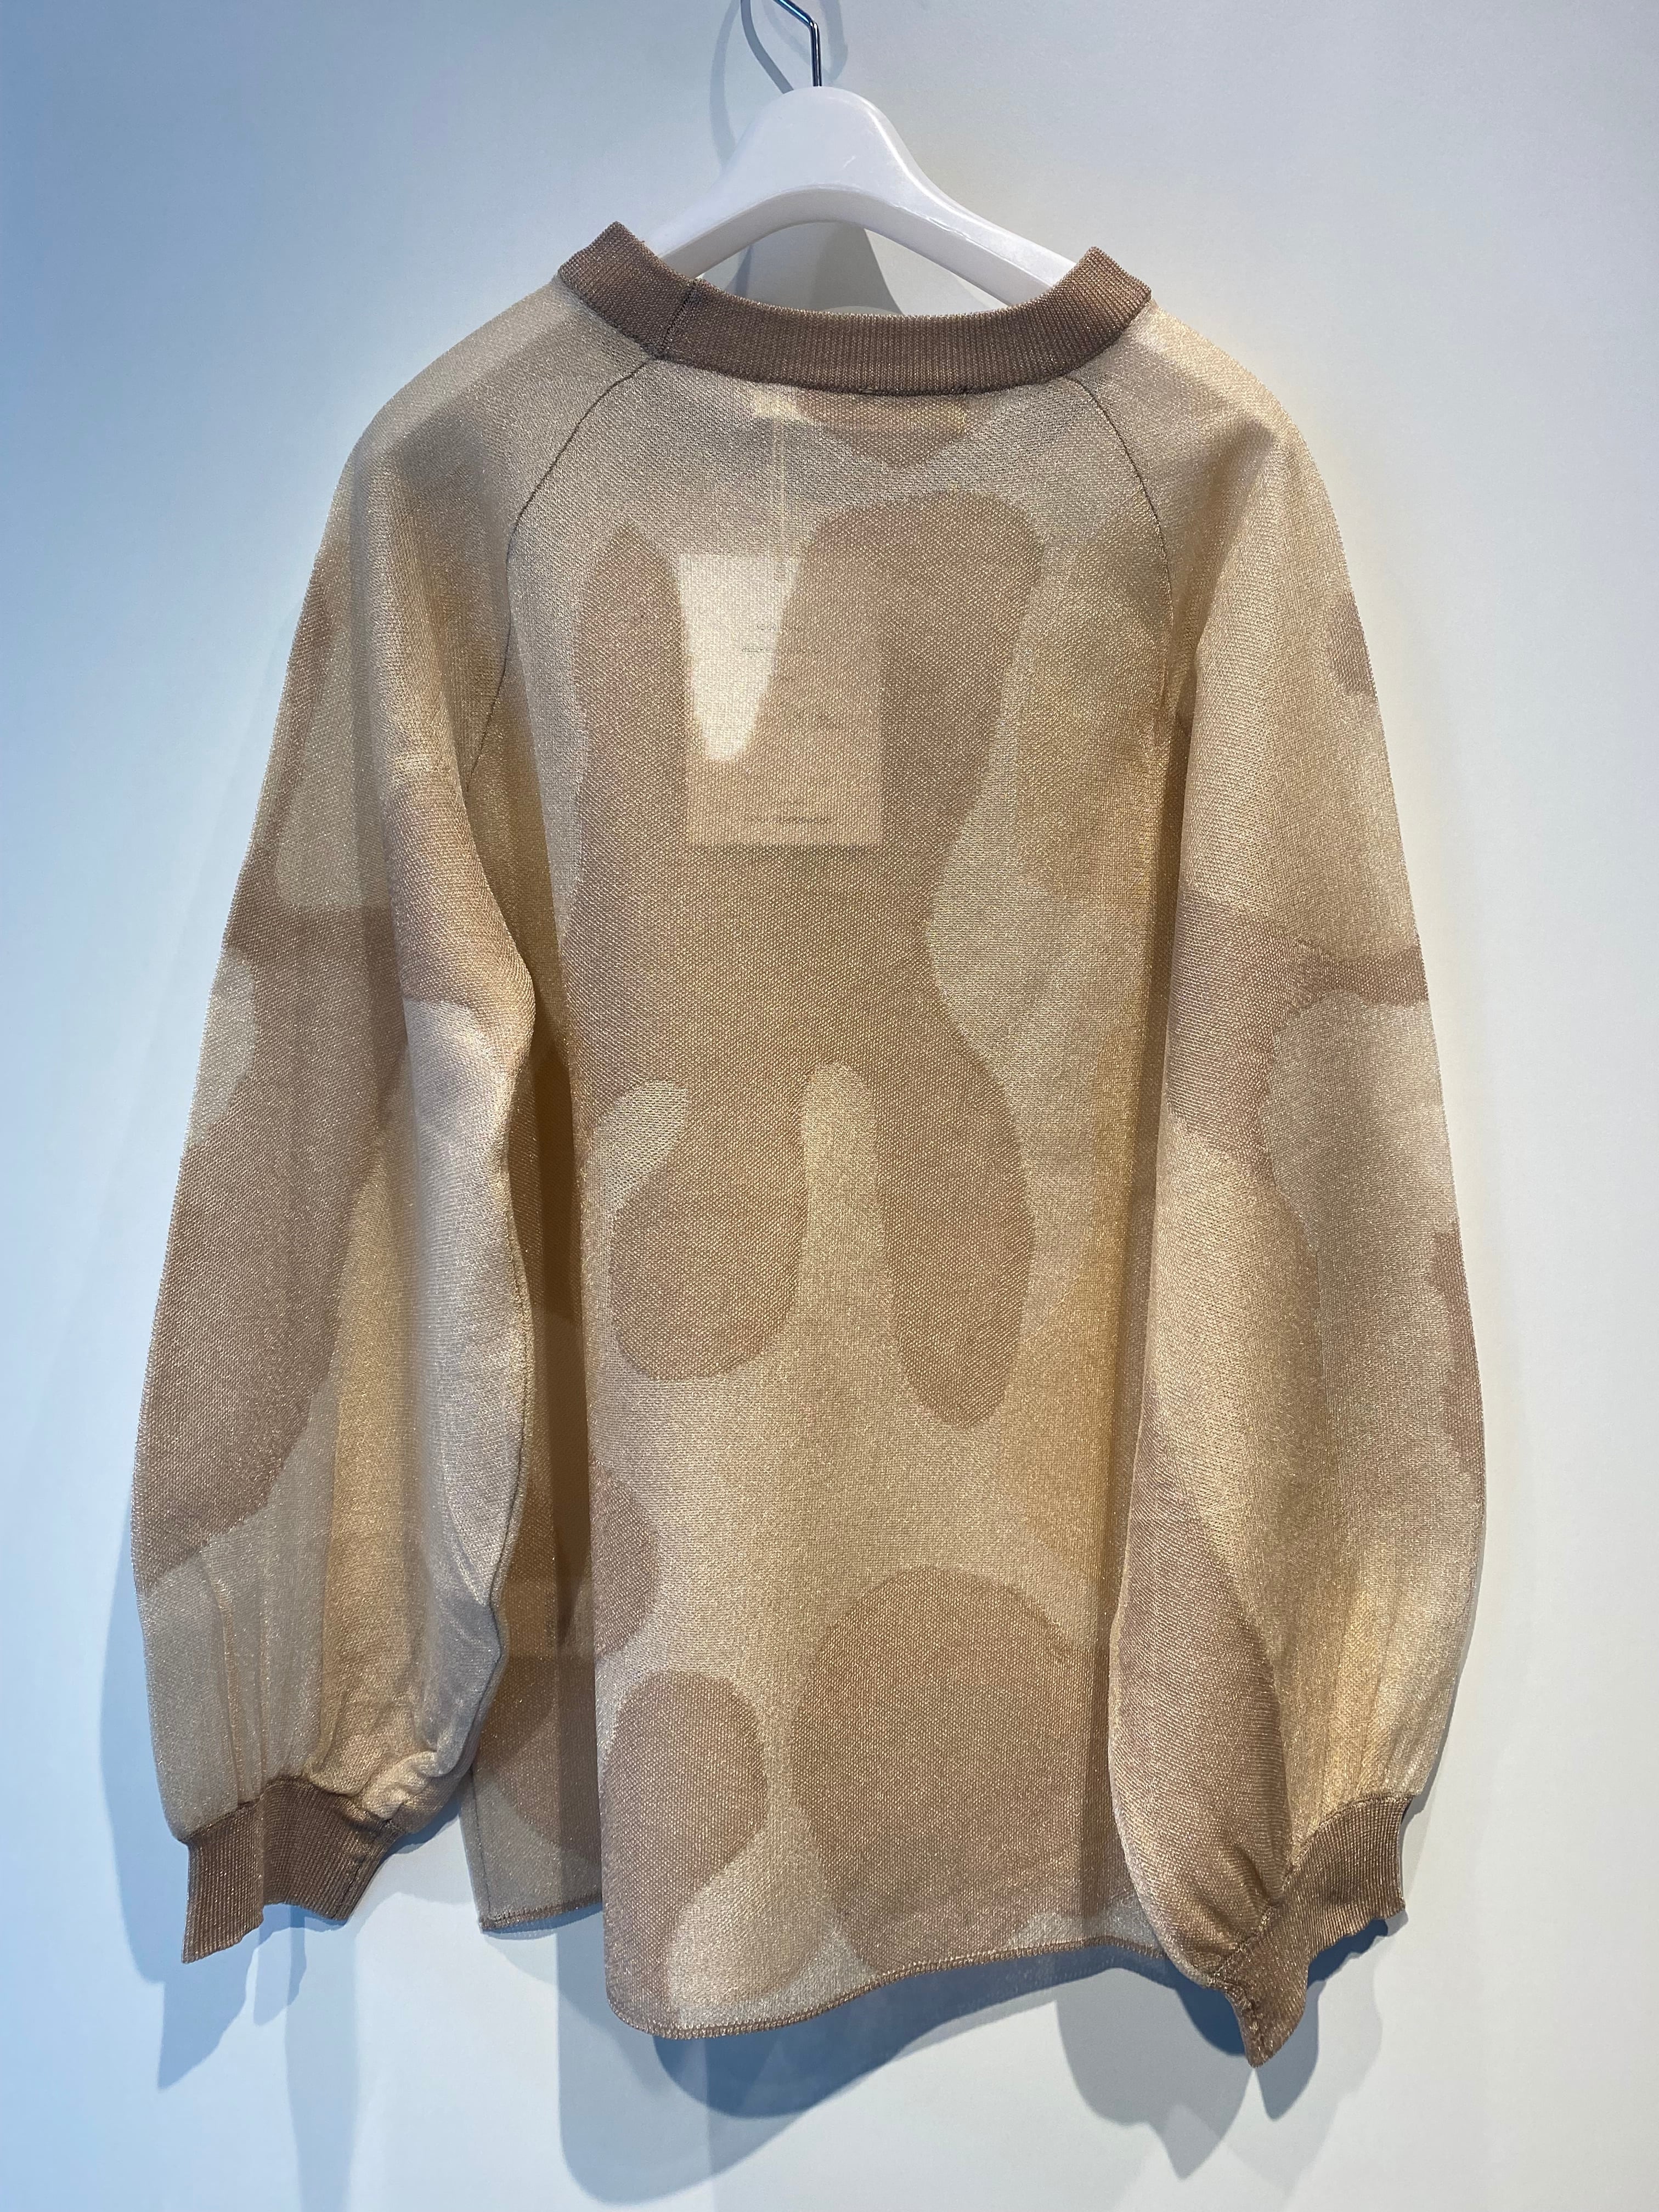 LEINWANDE nature camo sheer top／通販のお問い合わせ | AAR powered by BASE